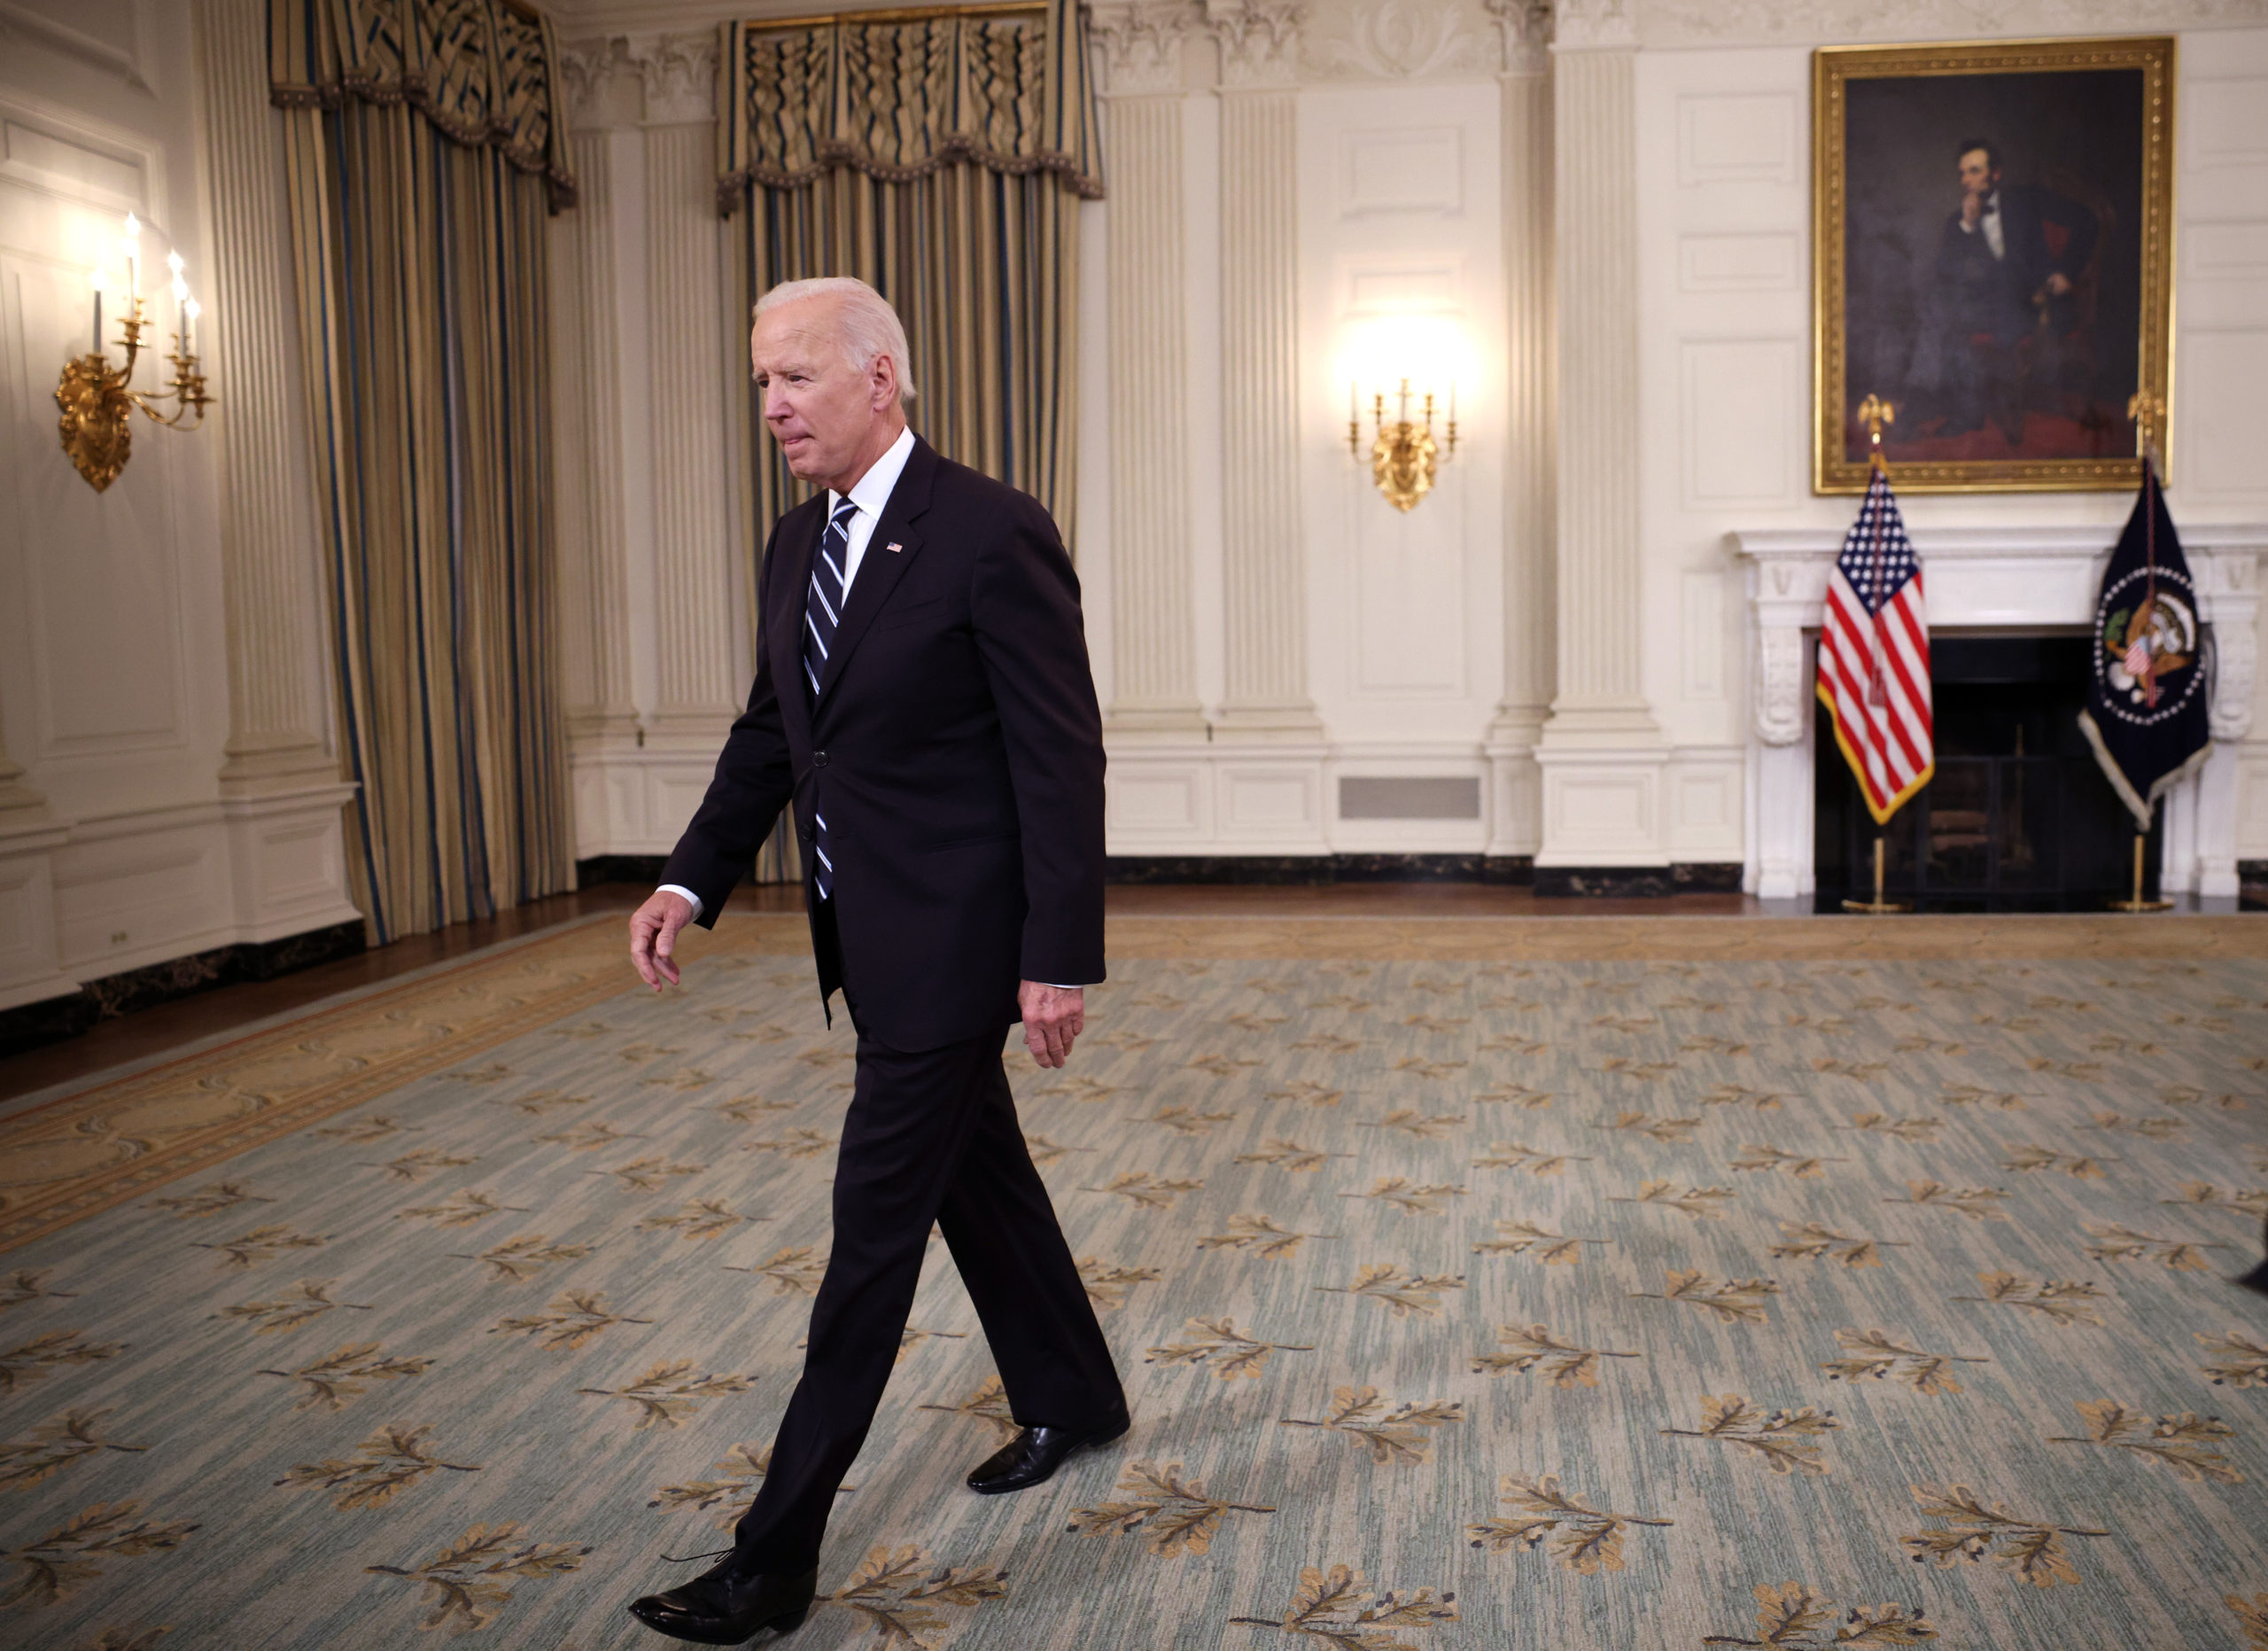 WASHINGTON, DC - SEPTEMBER 09: U.S. President Joe Biden leaves after speaking about combatting the coronavirus pandemic in the State Dining Room of the White House on September 9, 2021 in Washington, DC. As the Delta variant continues to spread around the United States, Biden outlined his administration's six point plan, including a requirement that all federal workers to be vaccinated against Covid-19. Biden is also instructing the Department of Labor to draft a rule mandating that all businesses with 100 or more employees require their workers to get vaccinated or face weekly testing. on September 09, 2021 in Washington, DC. (Photo by Kevin Dietsch/Getty Images)